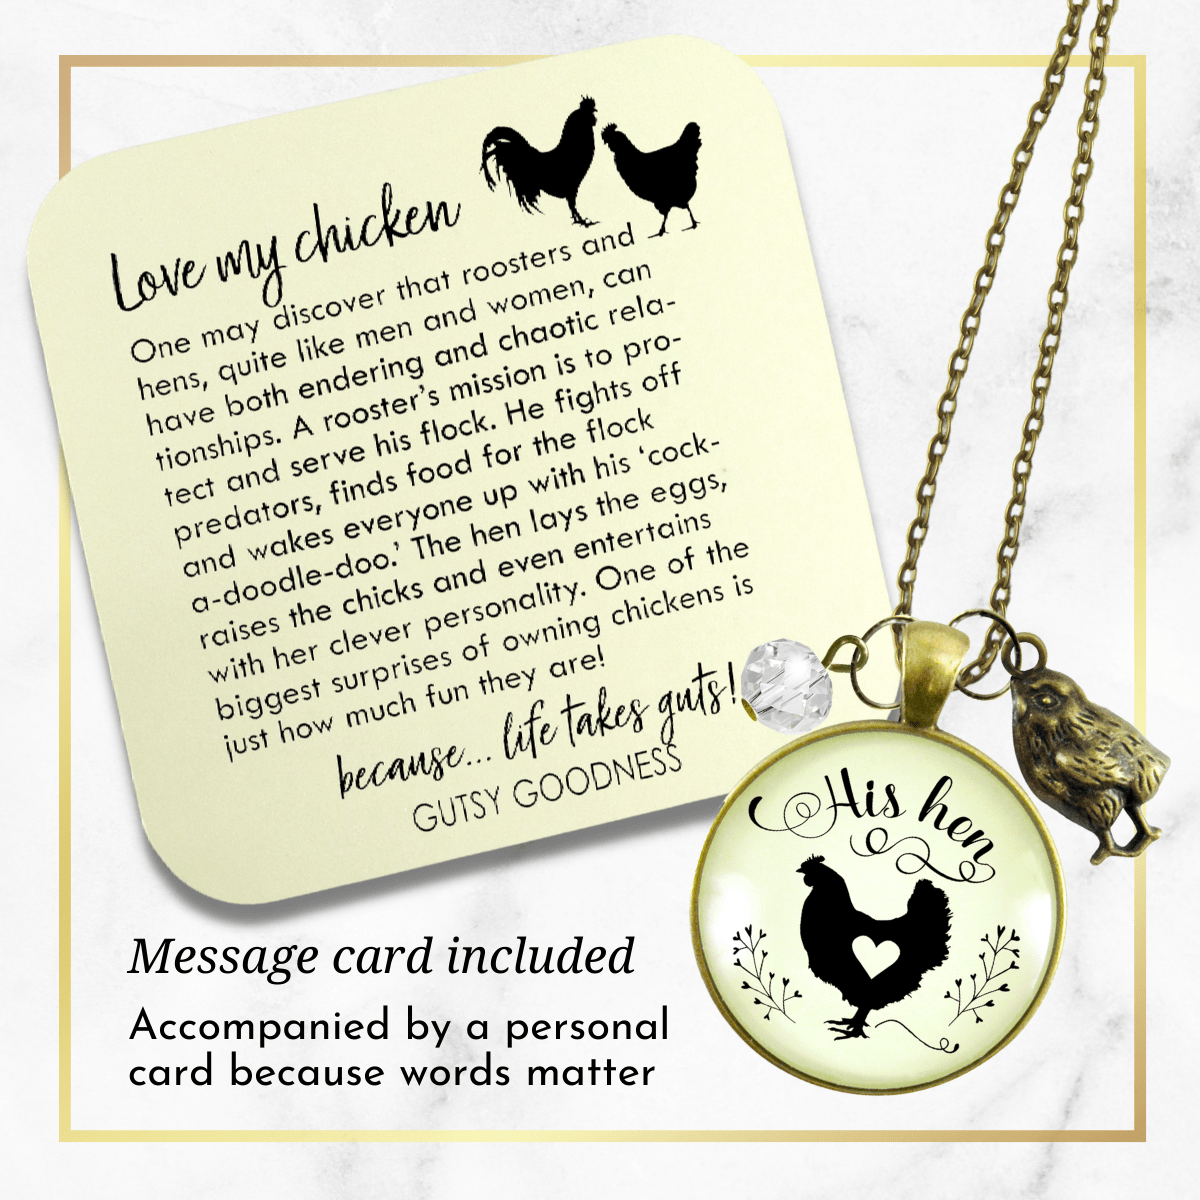 Gutsy Goodness His Hen Necklace For Chicken Mom Vintage Inspired Jewlery - Gutsy Goodness;His Hen Necklace For Chicken Mom Vintage Inspired Jewlery - Gutsy Goodness Handmade Jewelry Gifts